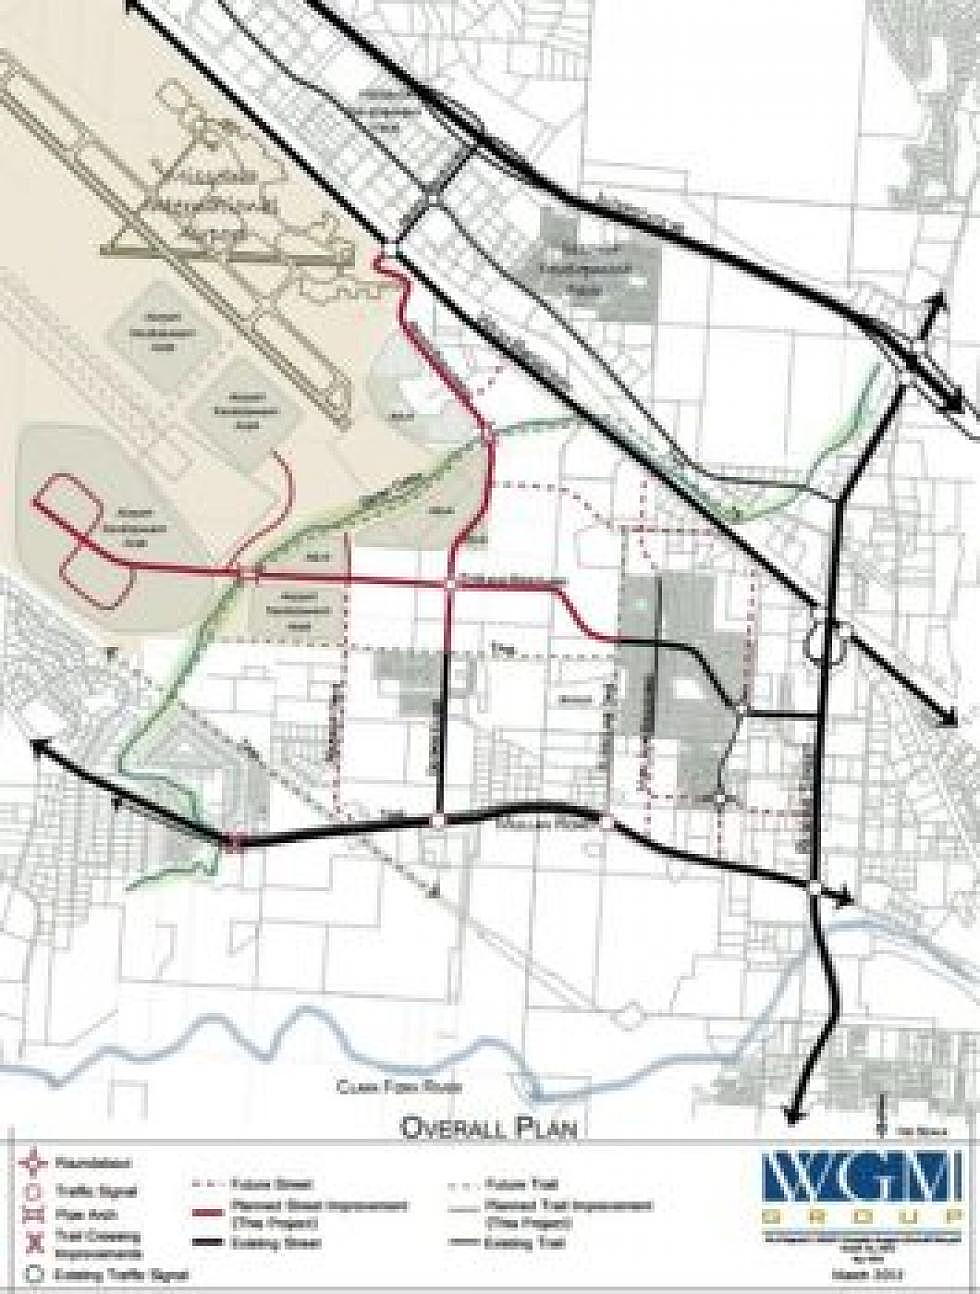 Missoula County to submit application to complete Mullan-area road grid